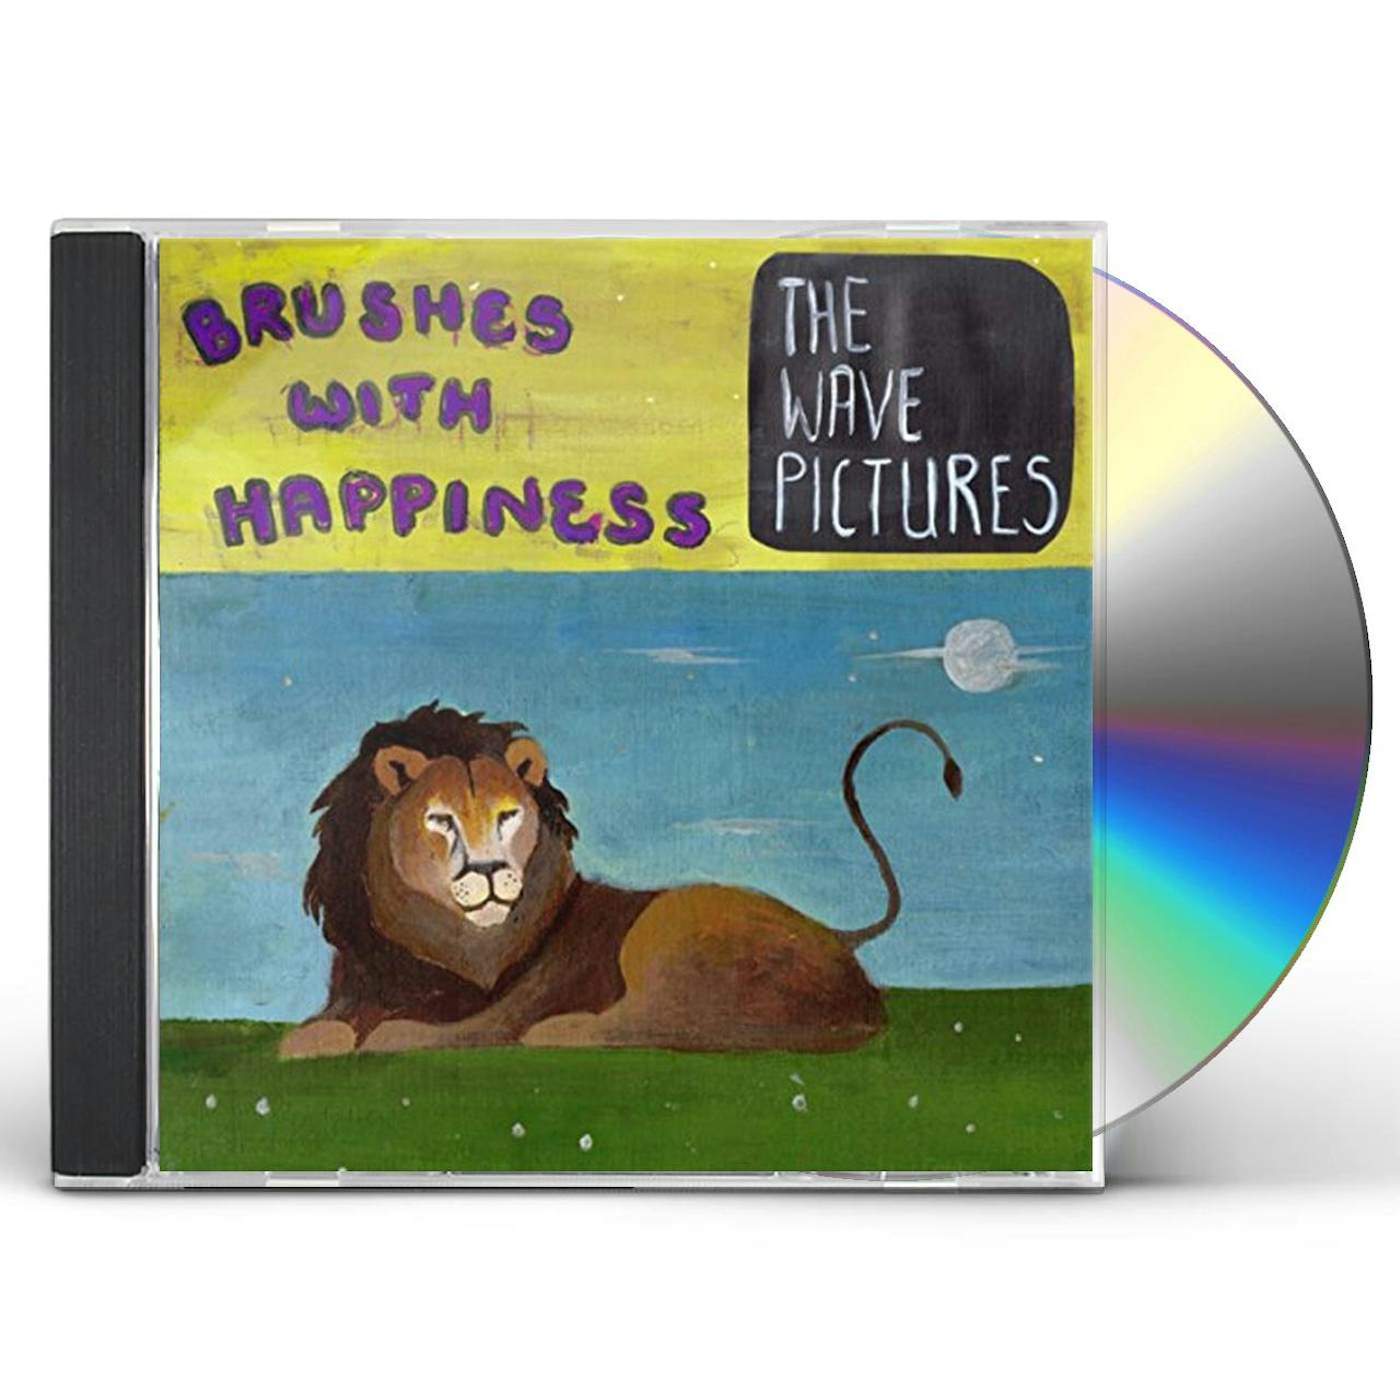 The Wave Pictures BRUSHES WITH HAPPINESS CD